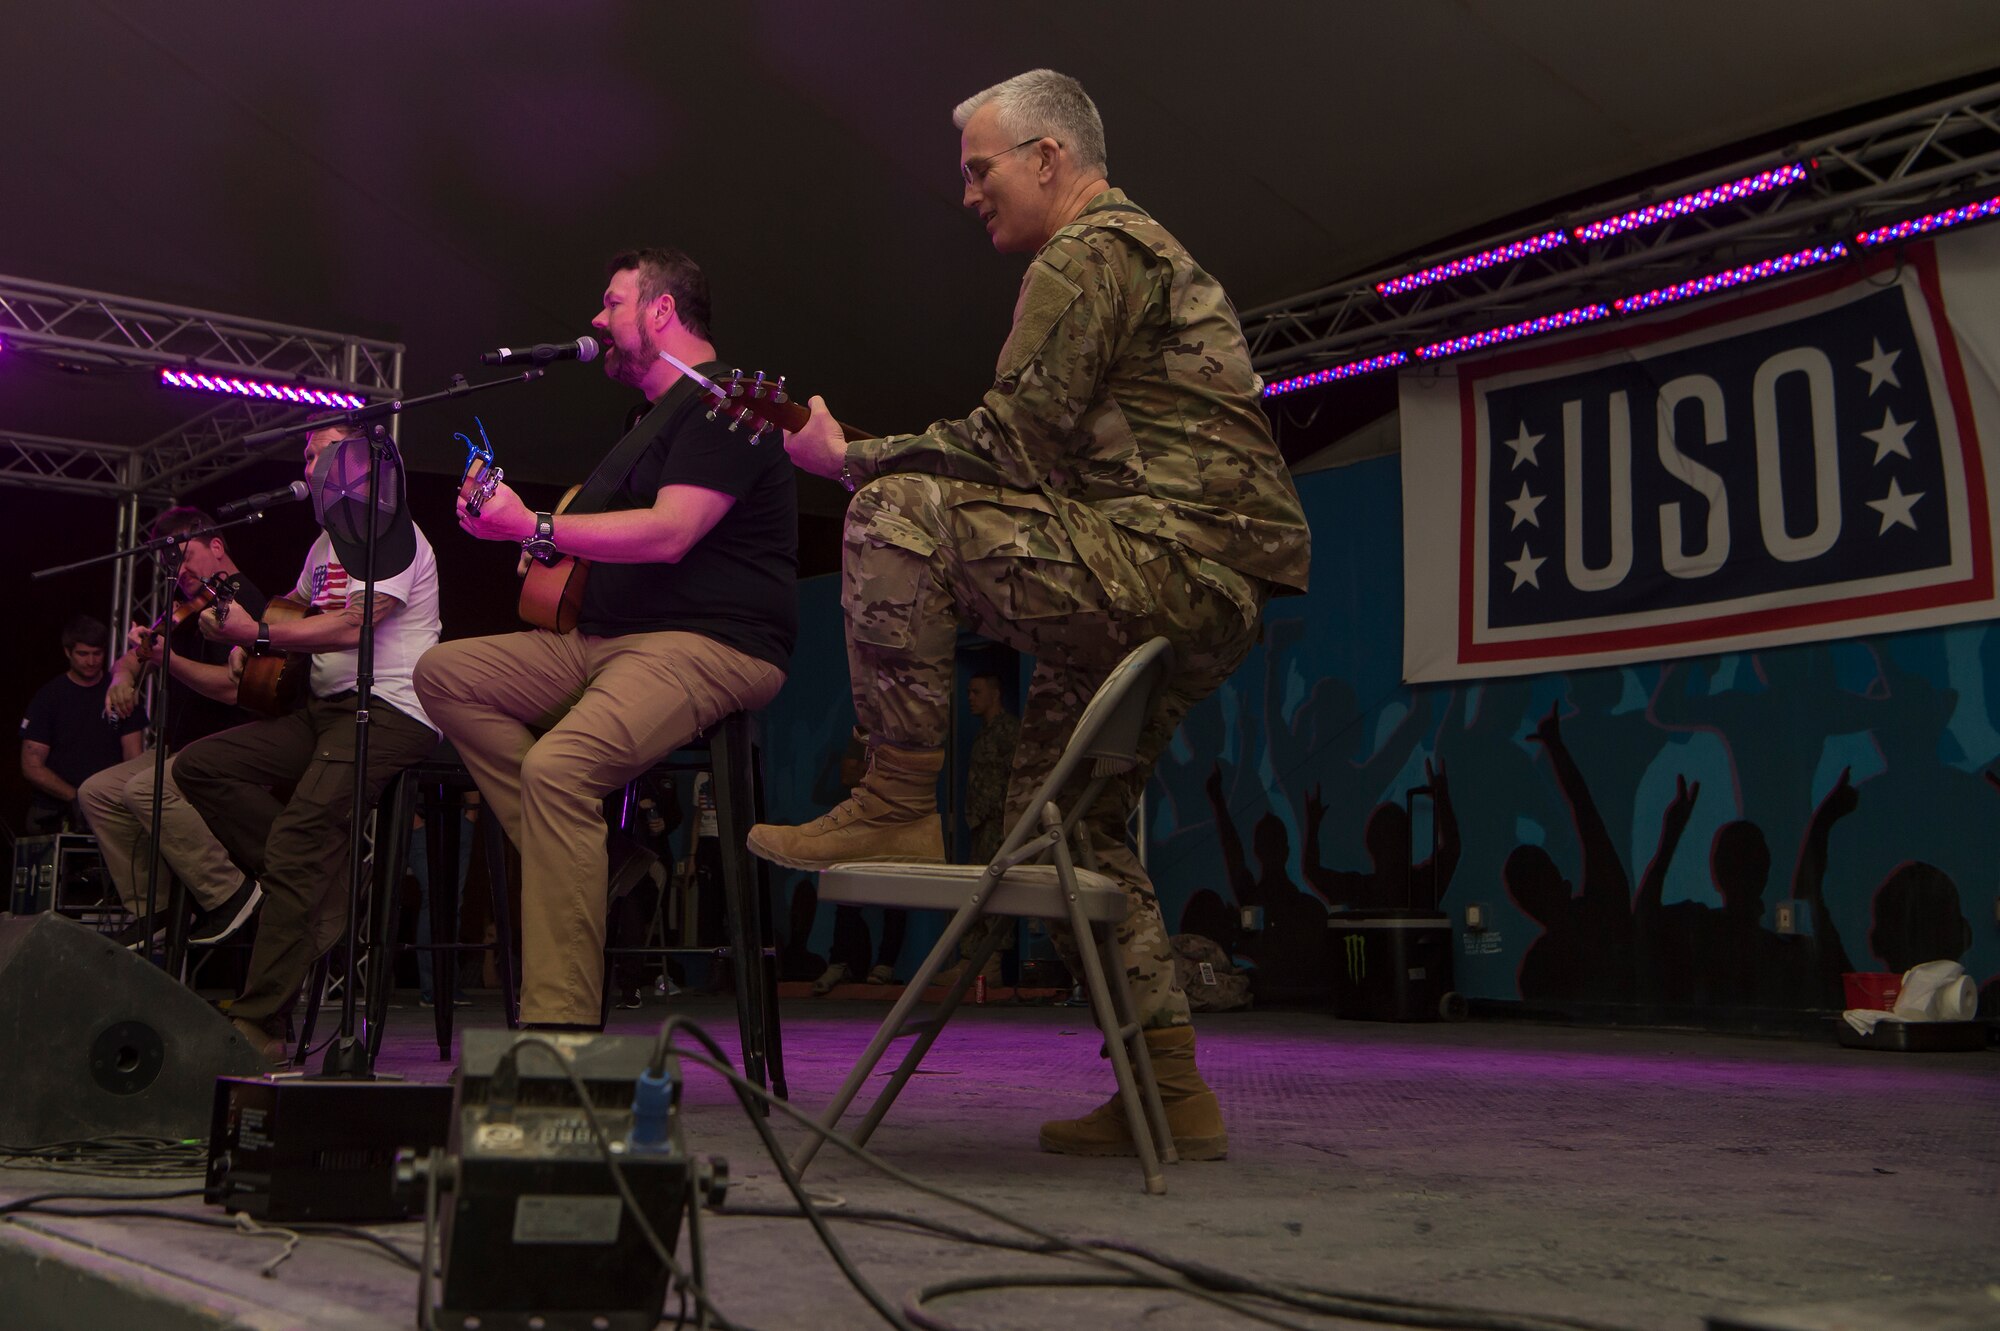 U.S. Air Force Gen. Paul Selva, center, Vice Chairman of the Joint Chiefs of Staff, performs with Craig Morgan, country music singer and songwriter, during the United Service Organizations (USO) tour April 1, 2019, at Al Udeid Air Base, Qatar. Selva hosted the tour alongside celebrities and performers including Morgan, Robert Irvine, and professional athletes. Each year the USO produces more than 50 entertainment tours, bringing hundreds of individual shows to American service members around the world.